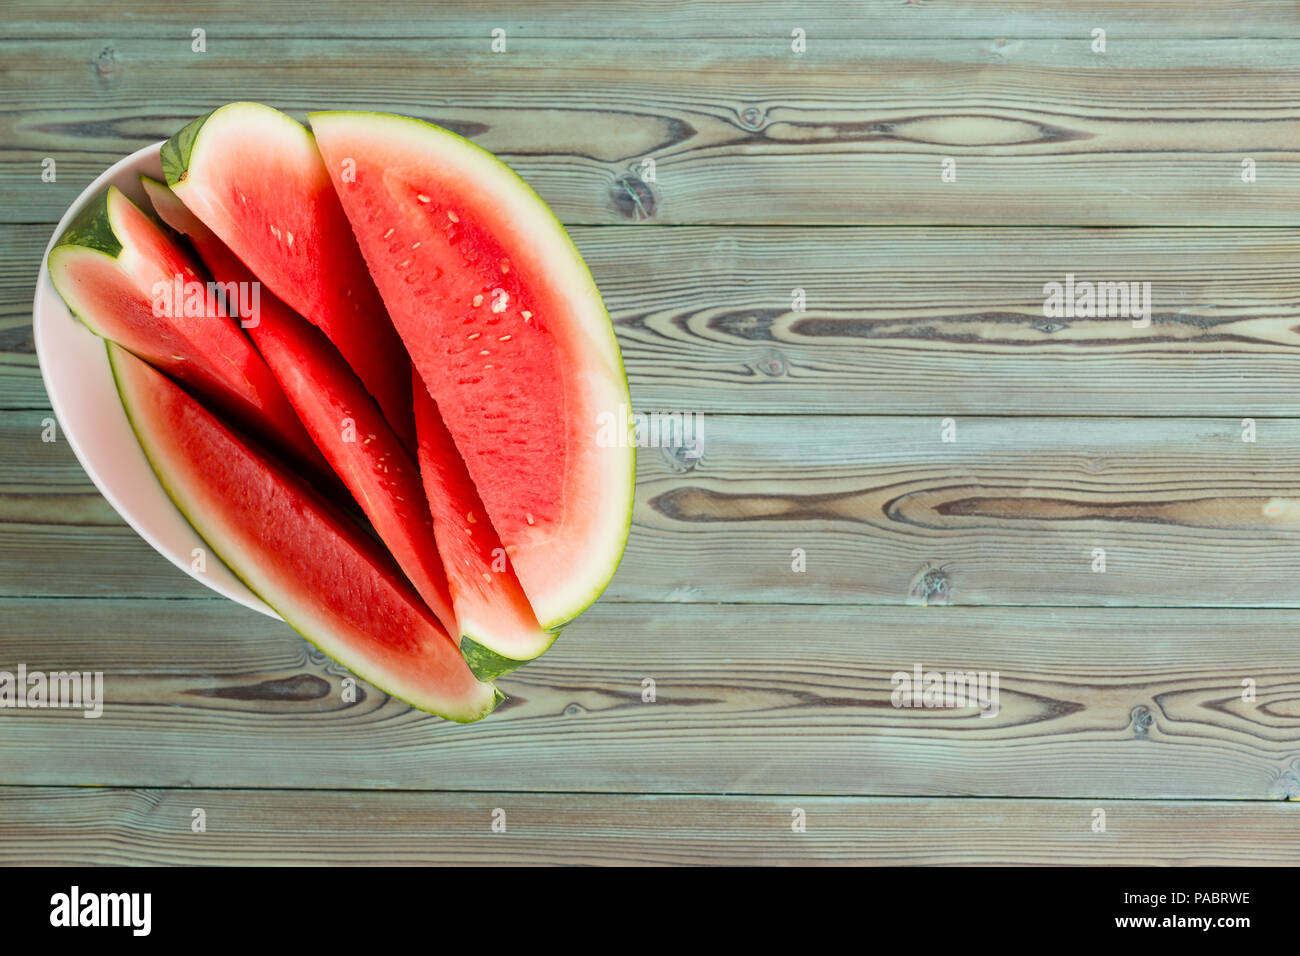 Wedges of delicious juicy fresh ripe watermelon for a healthy summer snack served on a plate on an old wood picnic table viewed from overhead with cop Stock Photo